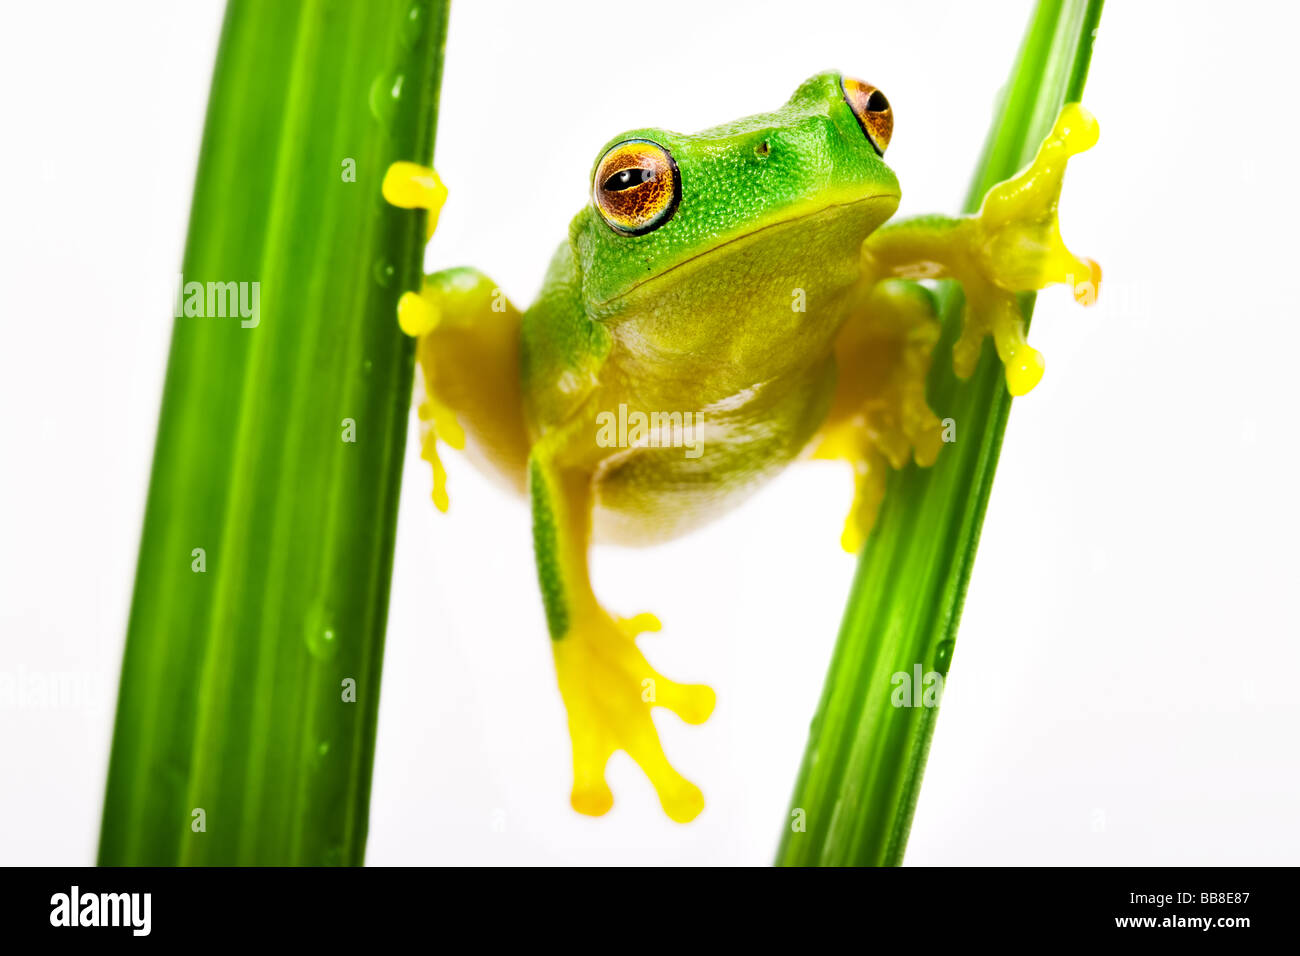 Small green tree frog holding on to grass blades Stock Photo